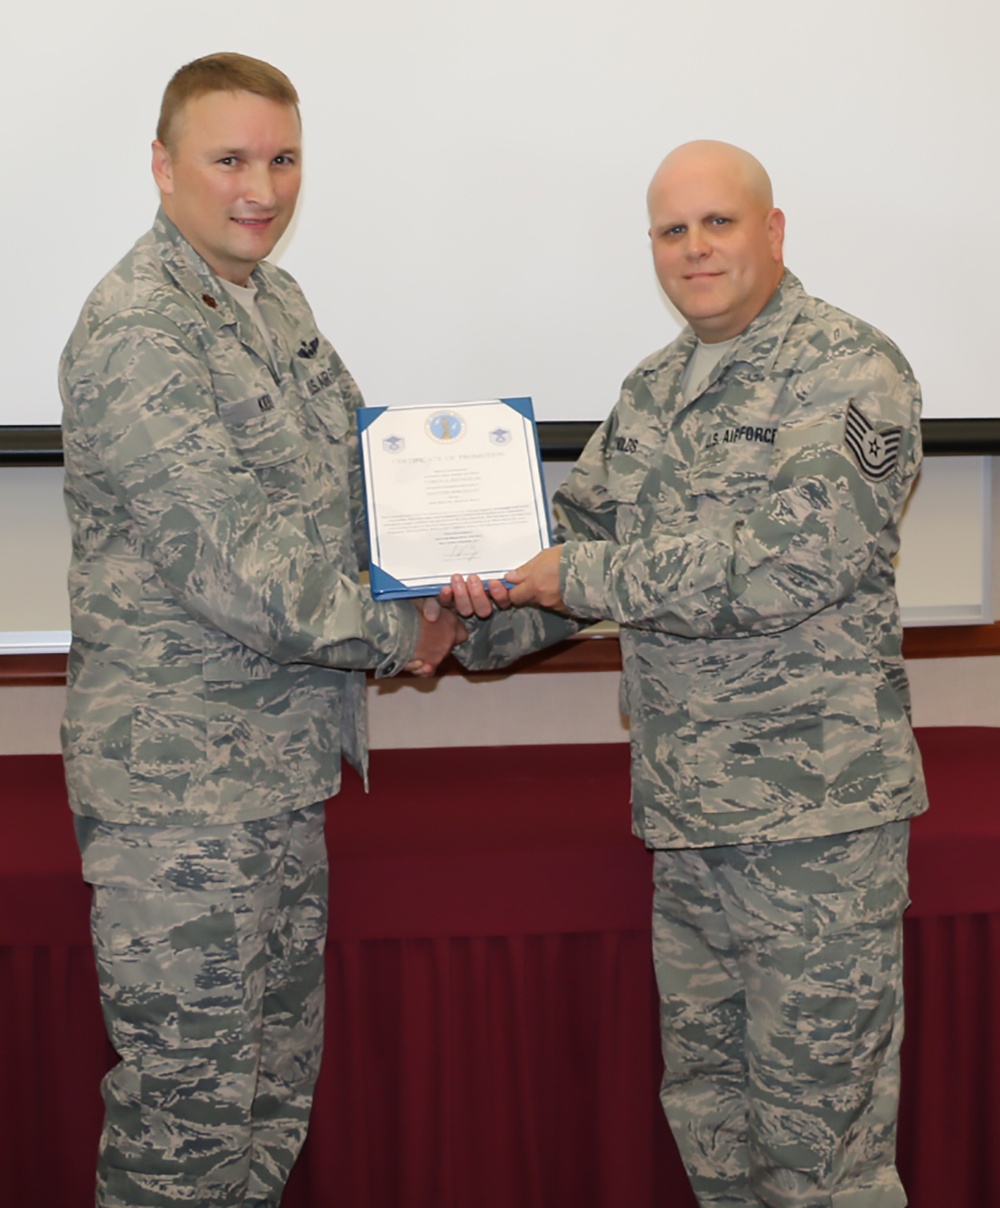 Reynolds Promoted to Master Sergeant